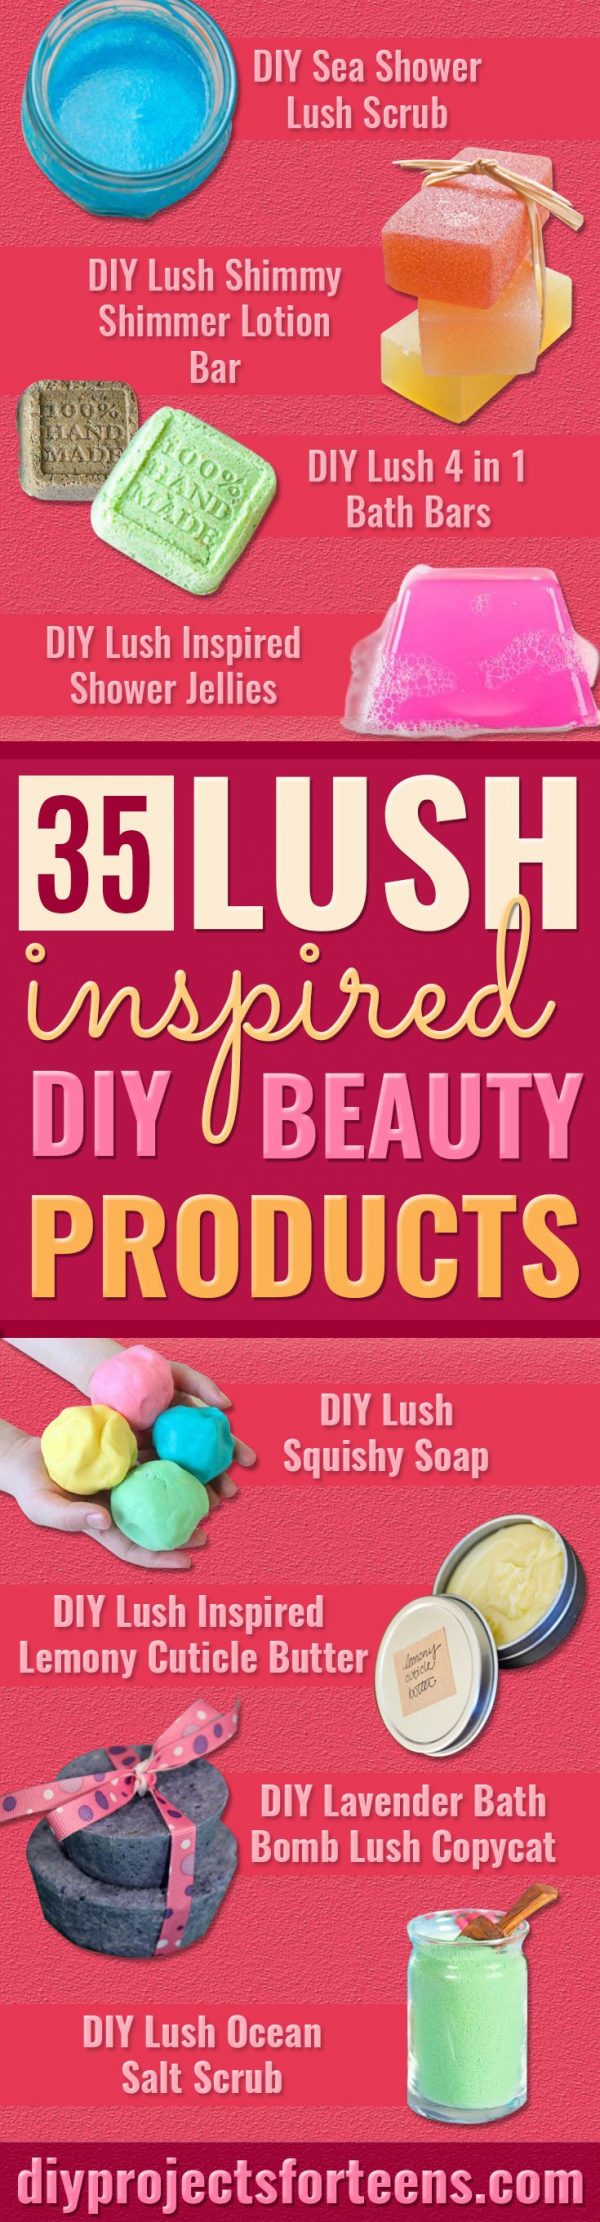 DIY Lush Inspired Recipes - How to Make Lush Products like Bath Bombs, Face Masks, Lip Scrub, Bubble Bars, Dry Shampoo and Hair Conditioner, Shower Jelly, Lotion, Soap, Toner and Moisturizer. Copycat and Dupes of Ocean Salt, Buffy, Dark Angels, Rub Rub Rub, Big, Dream Cream and More. #teencrafts #lush #beautyideas #diybeauty #bathbombs